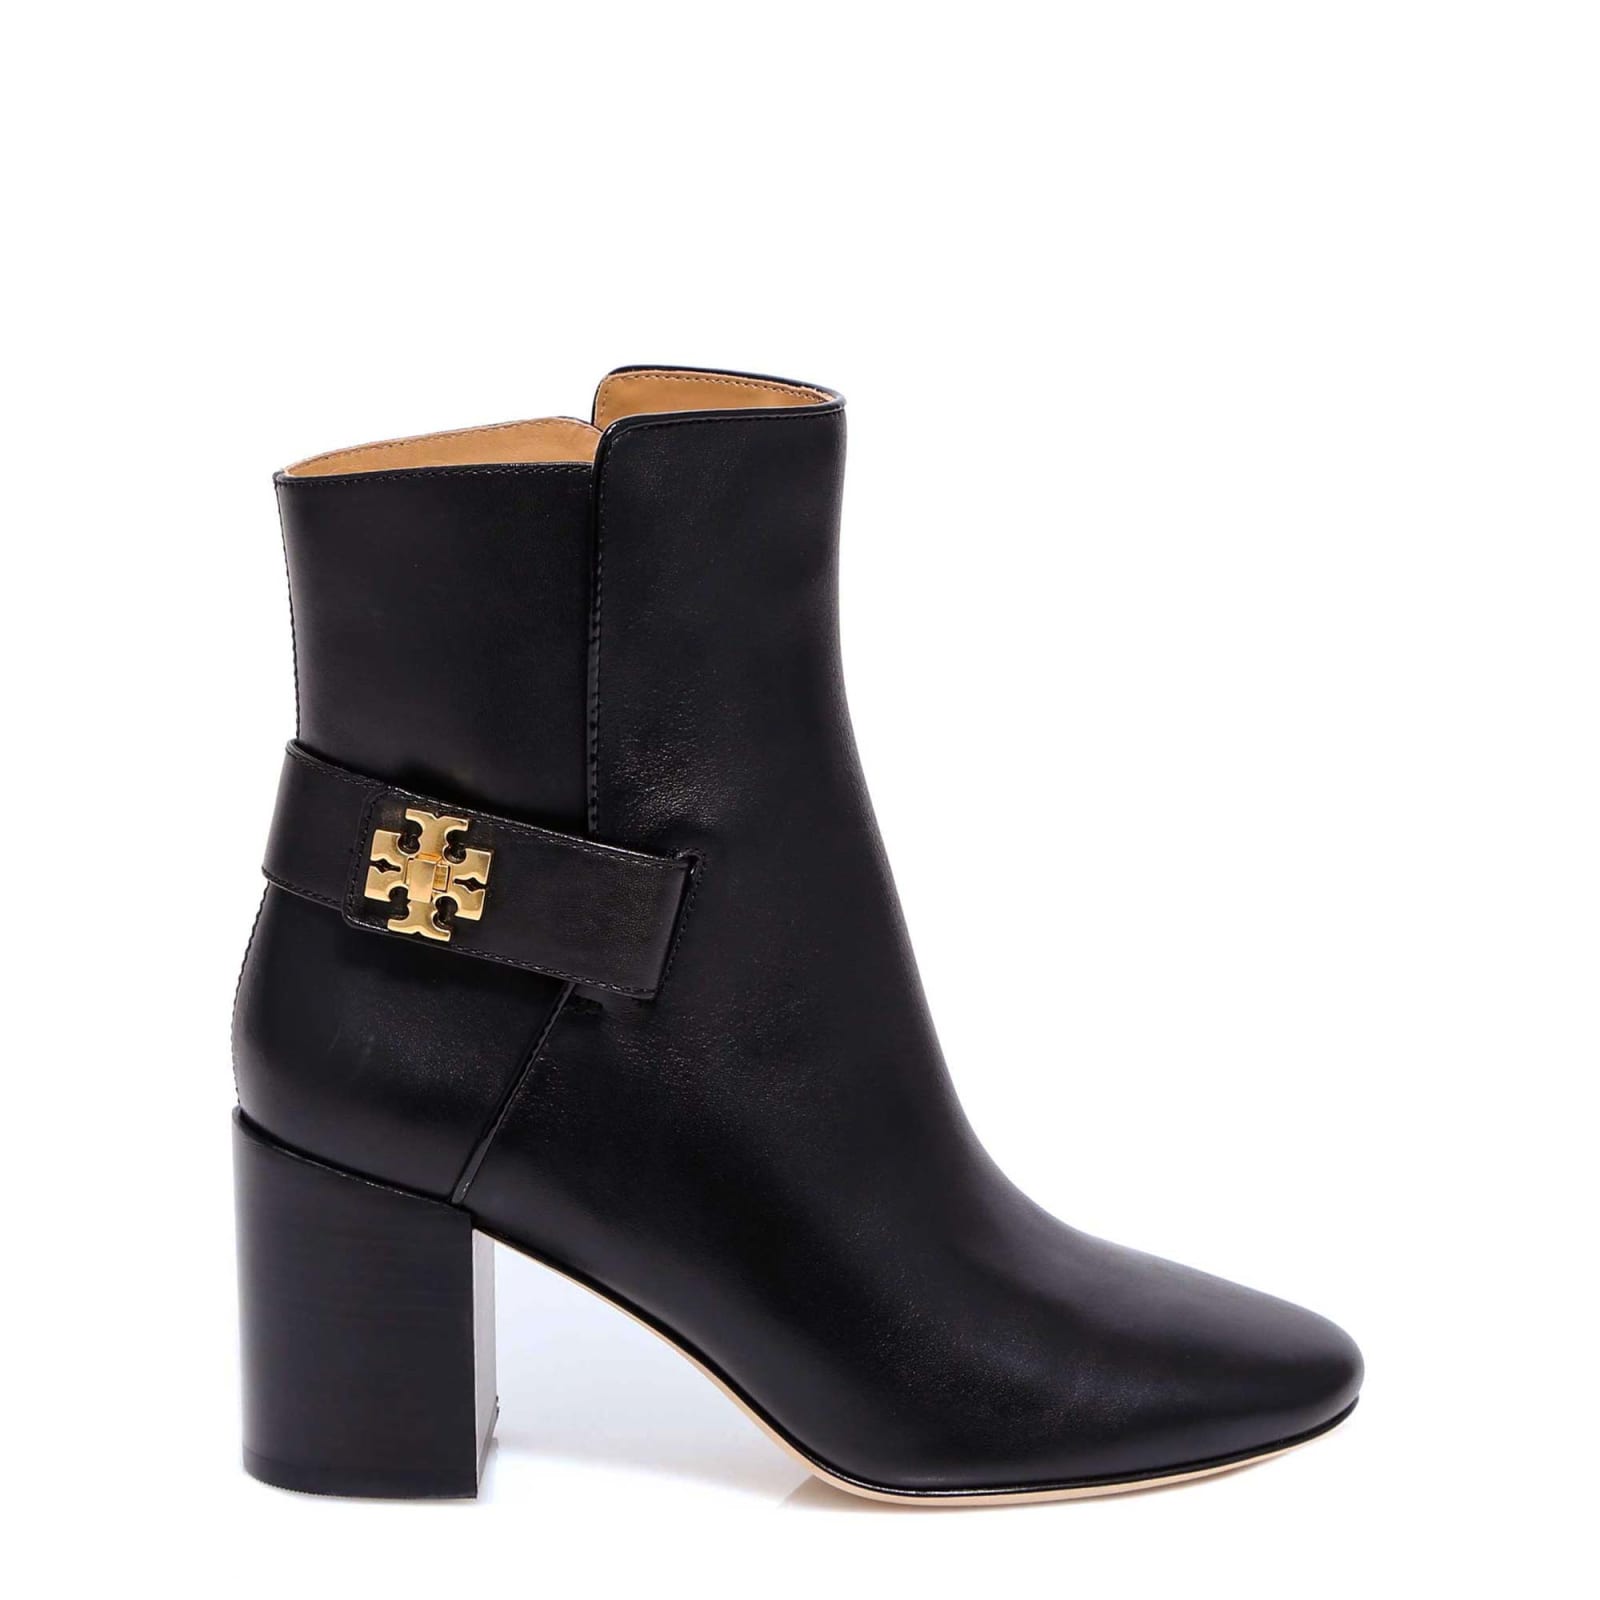 tory burch patent leather boots